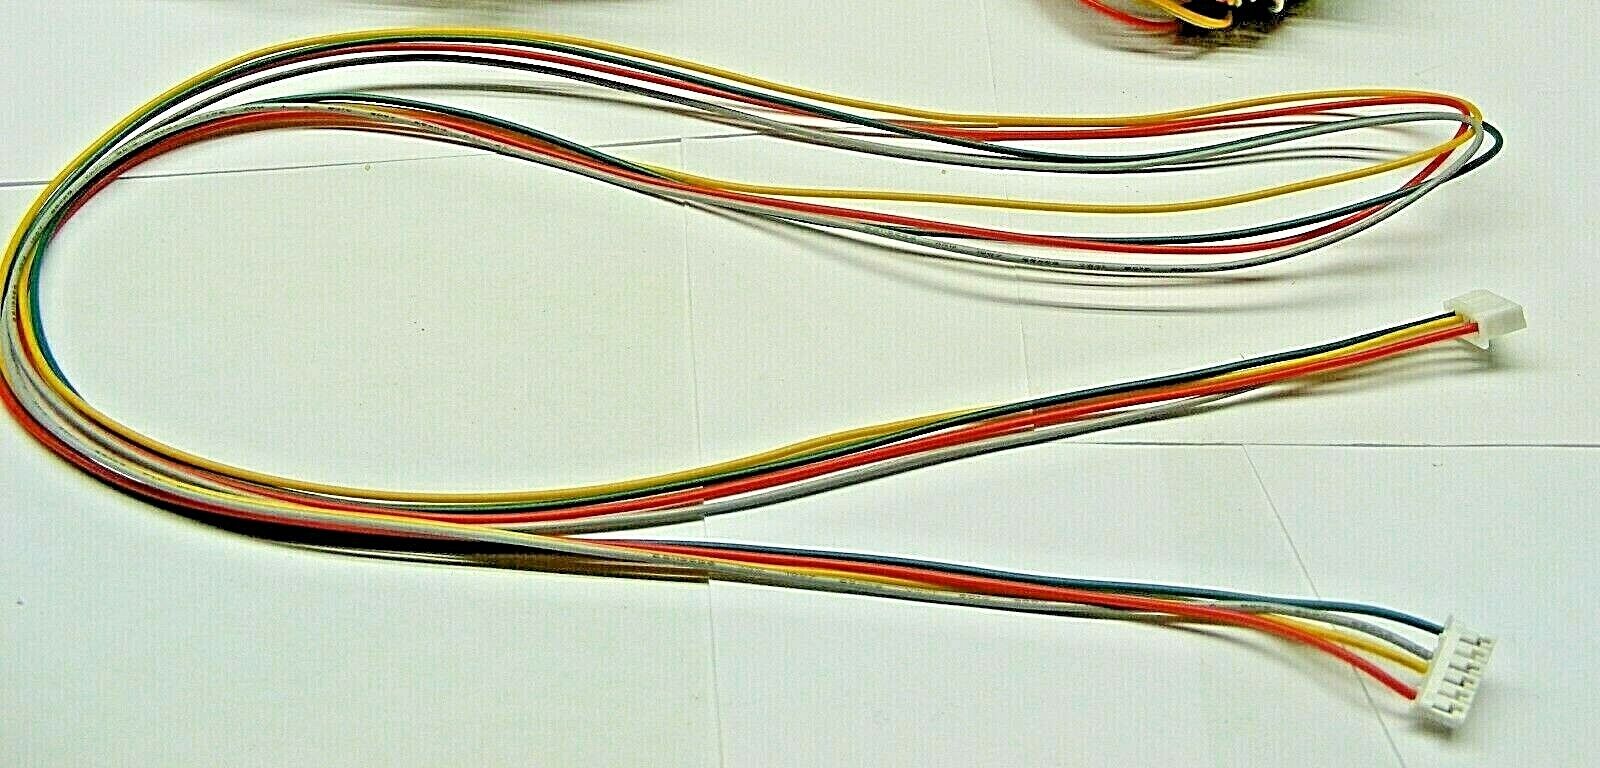 X5 LOT NEMA STEPPER MOTOR CABLE 1 METER GRN GRY YEL RED 6 PIN 4 PIN XH2.54 USA